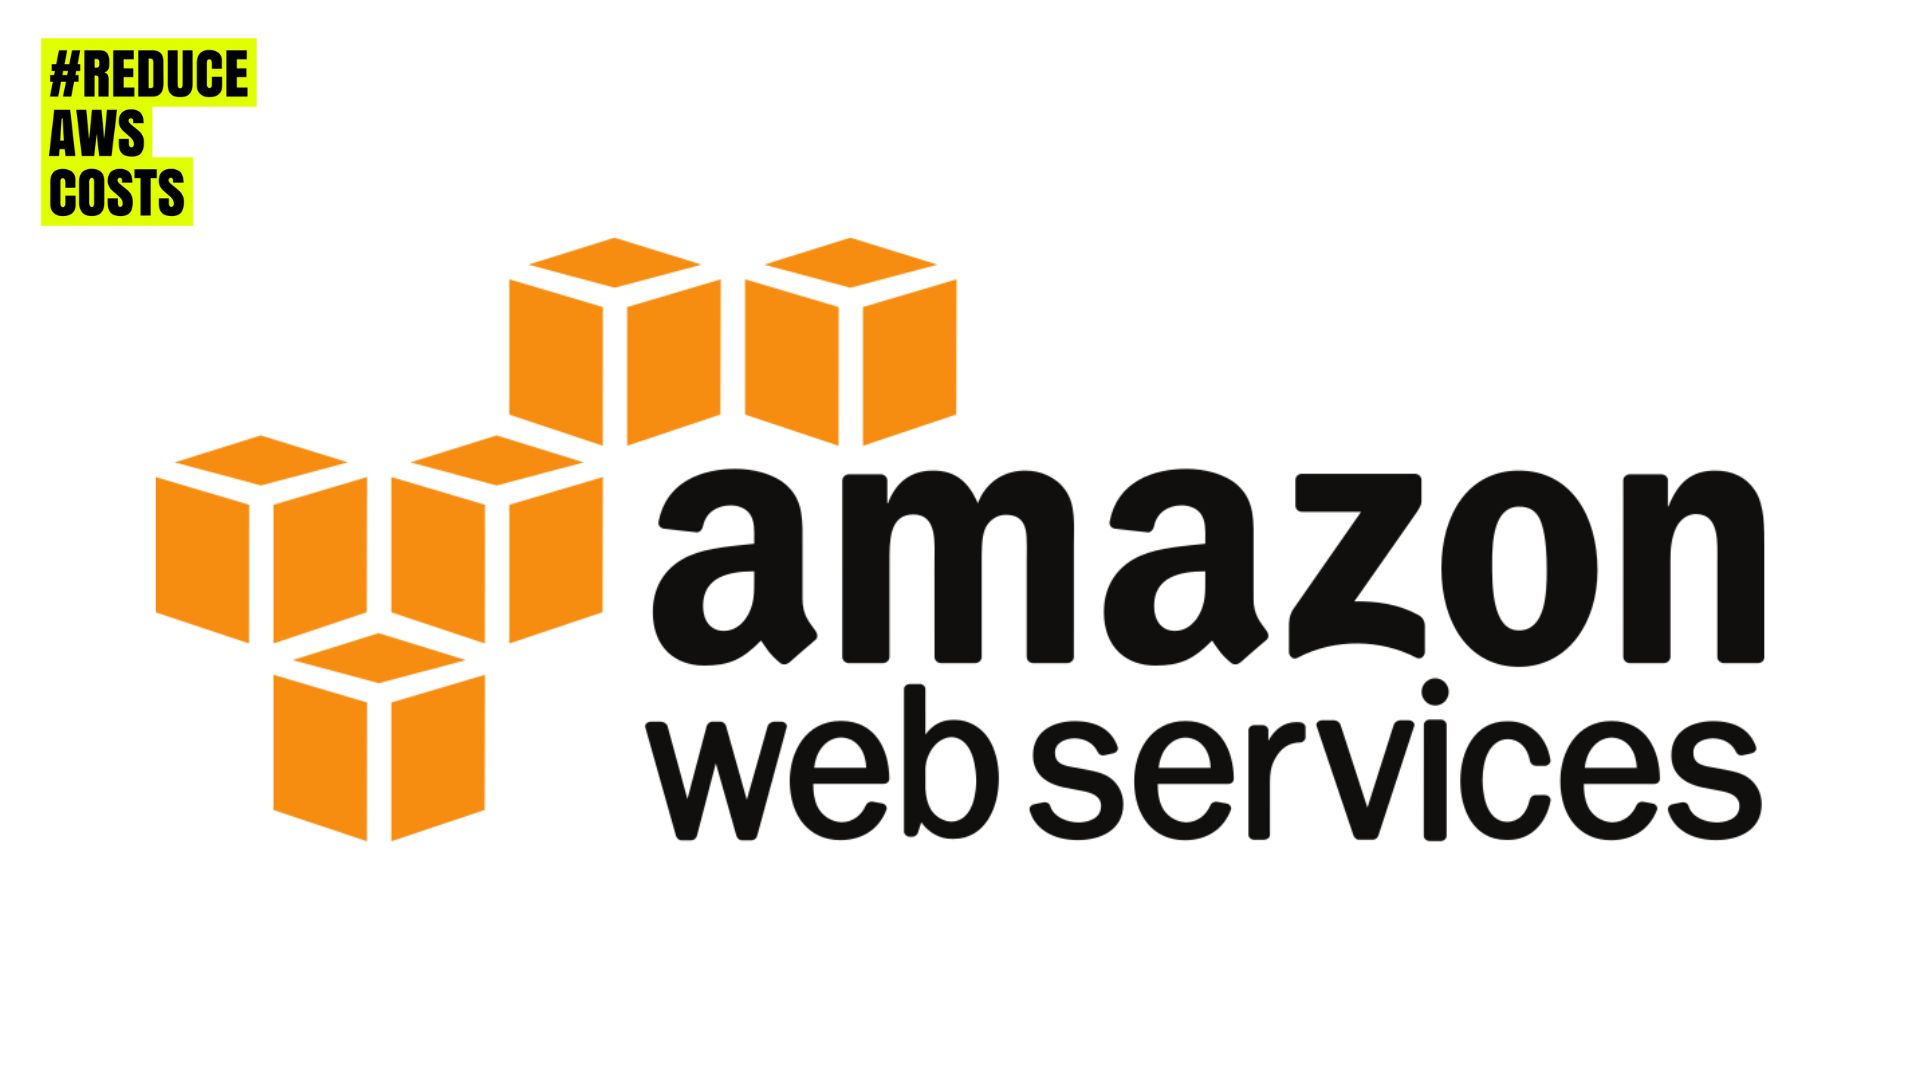 Cloud Platform Provided By Amazon: AWS Intro